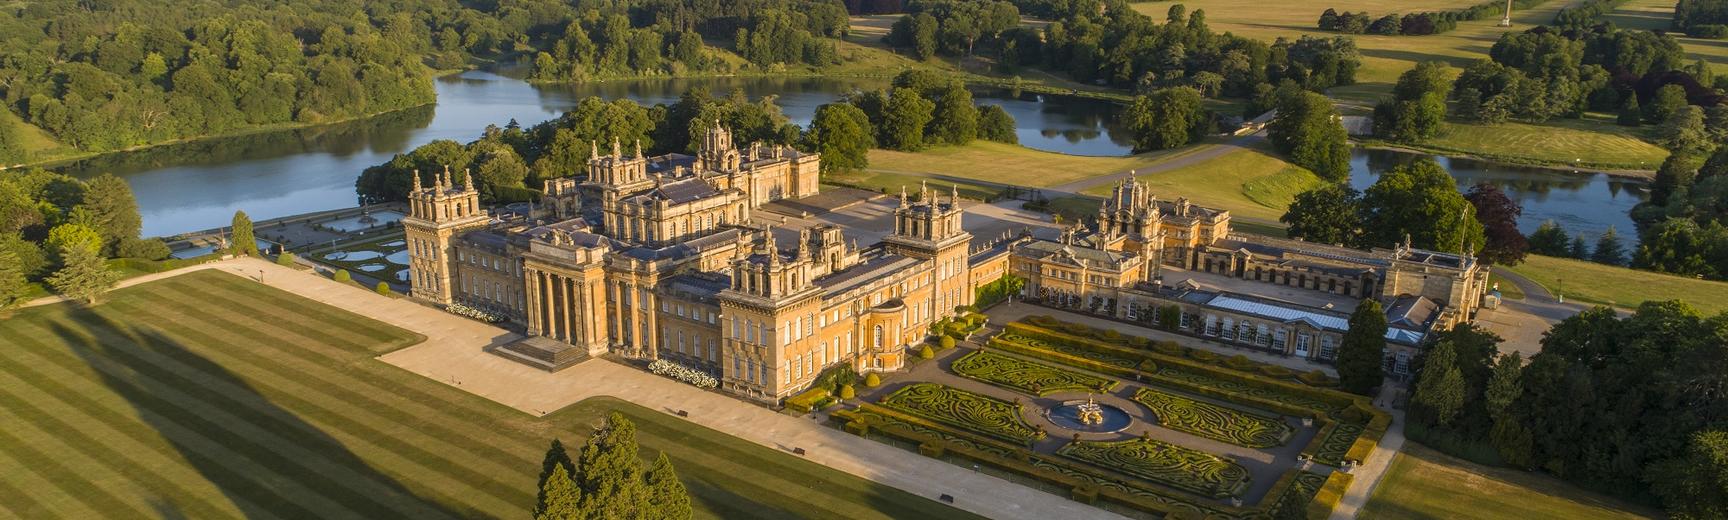 Blenheim Palace South Lawn shown from an aerial shot